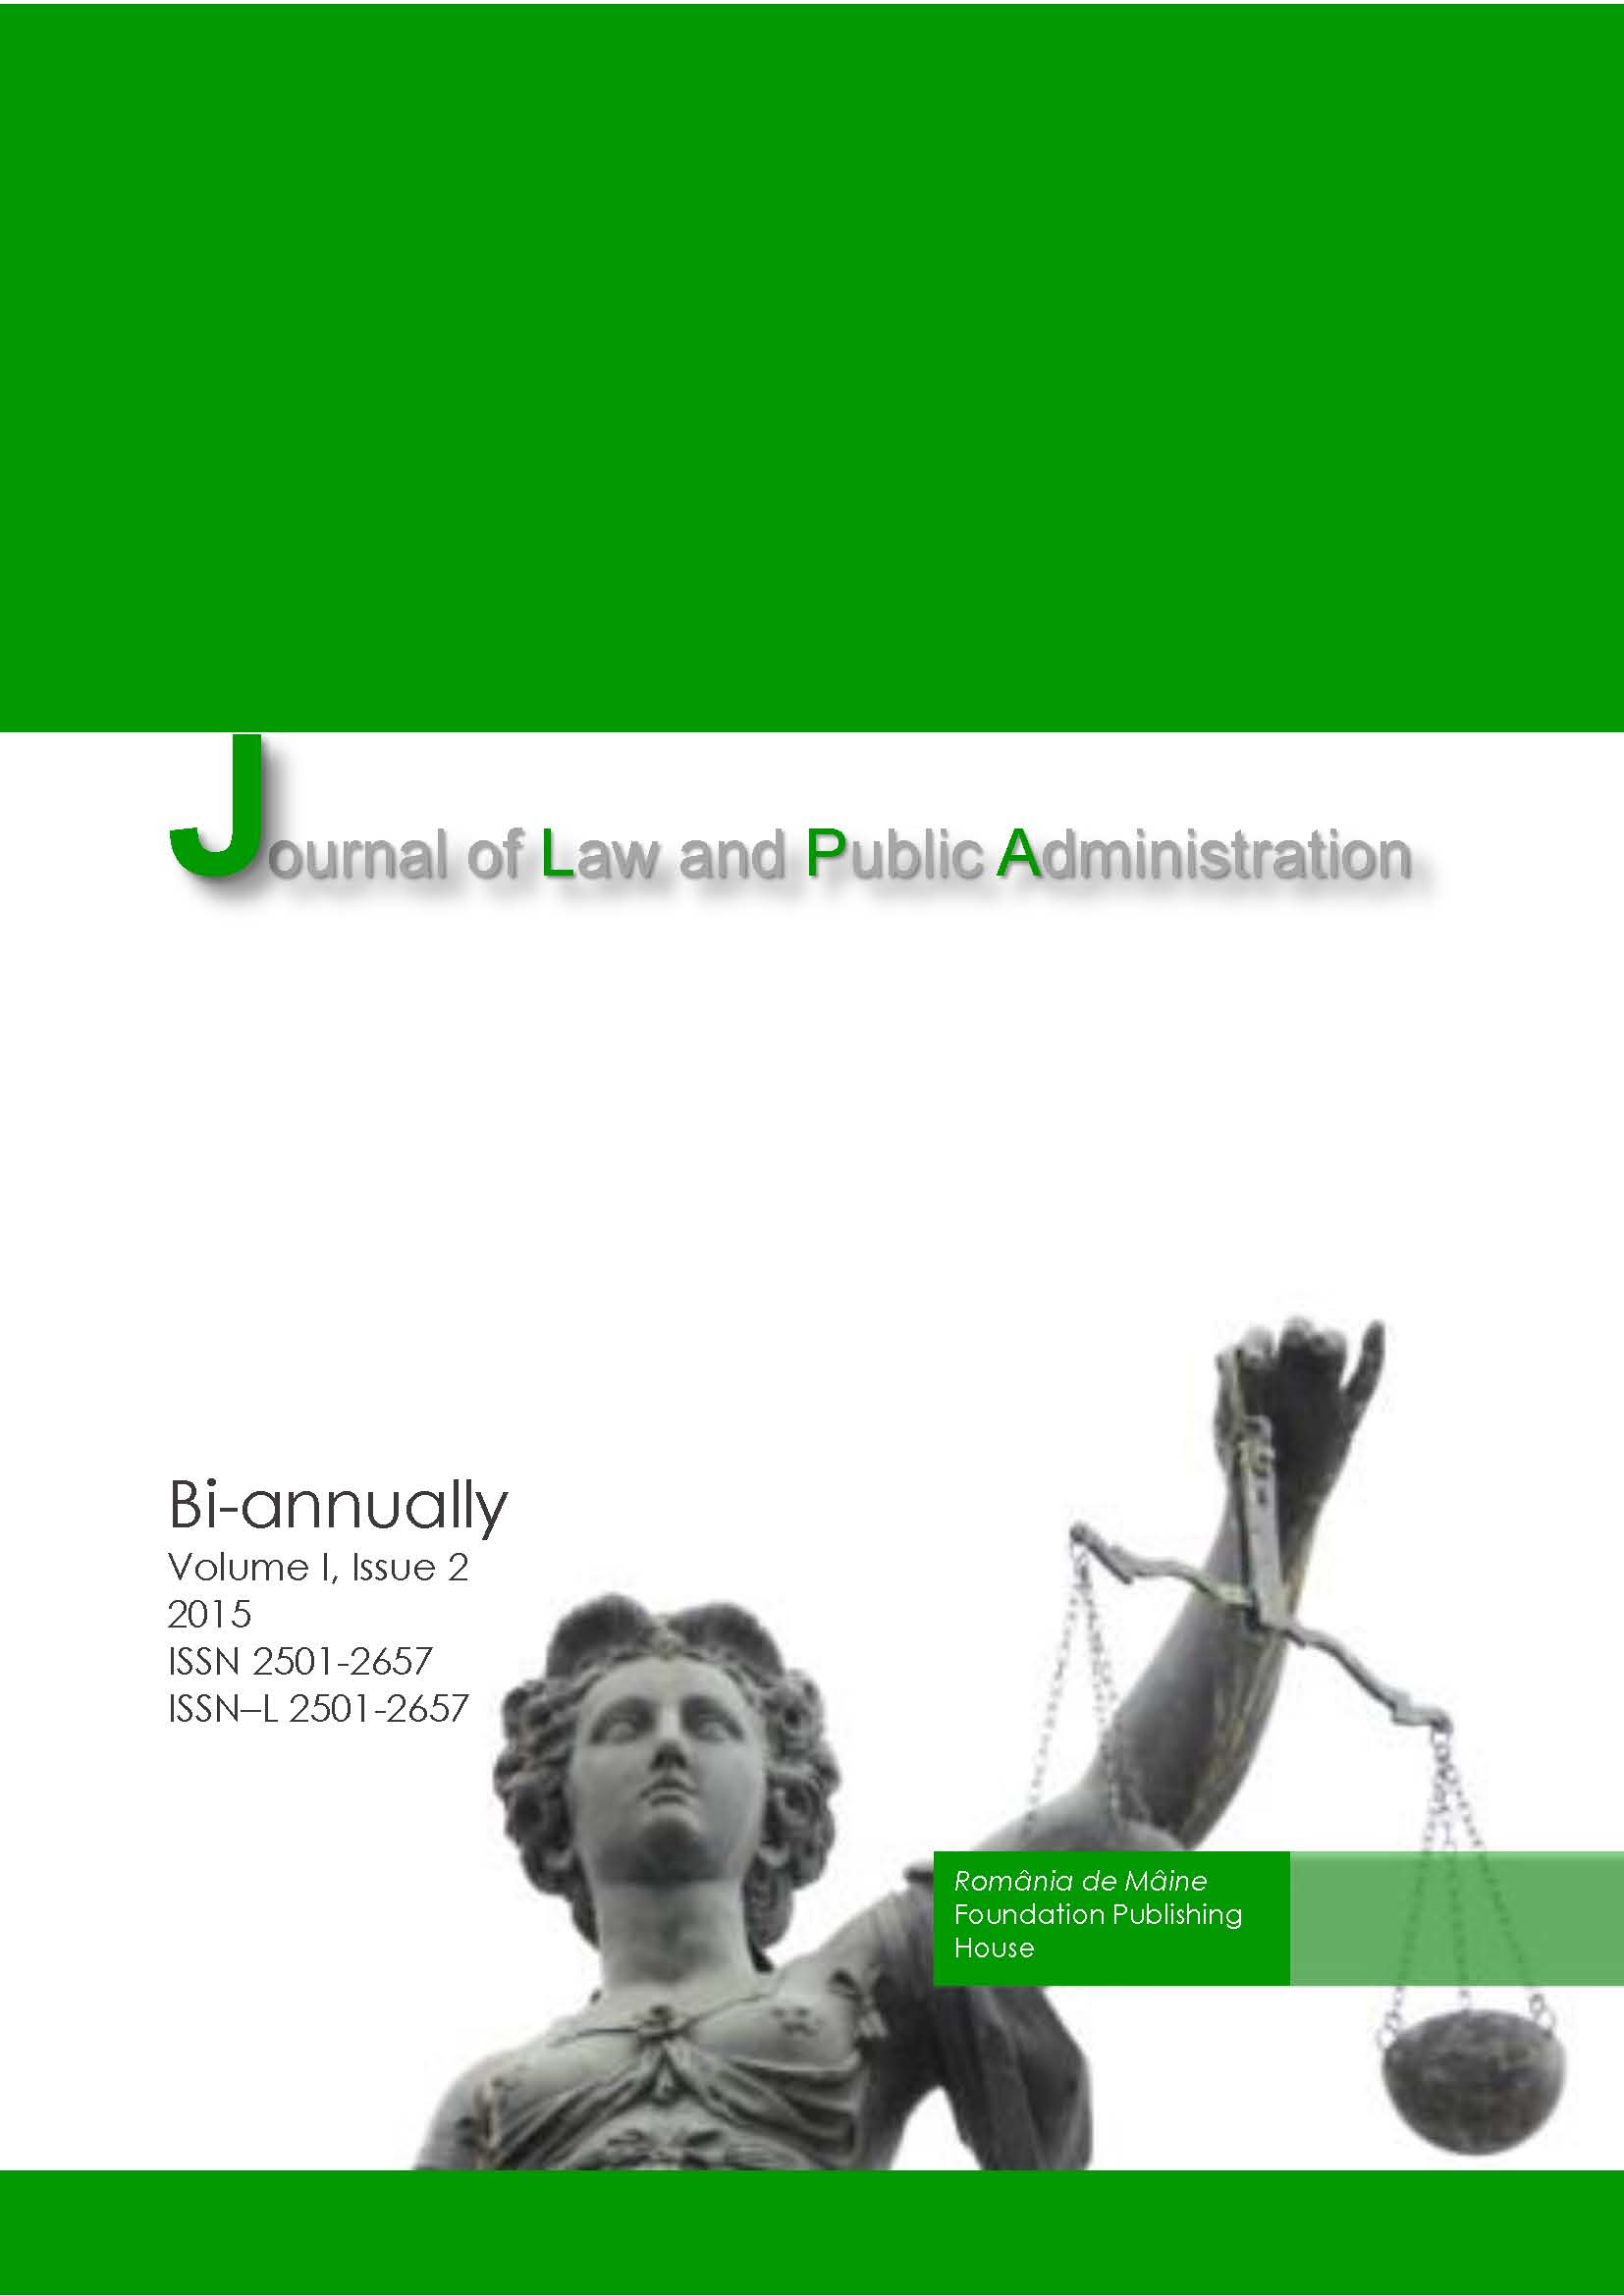 Considerations Regarding the Incidence  of Administrative Appeals in the Environmental Law Cover Image